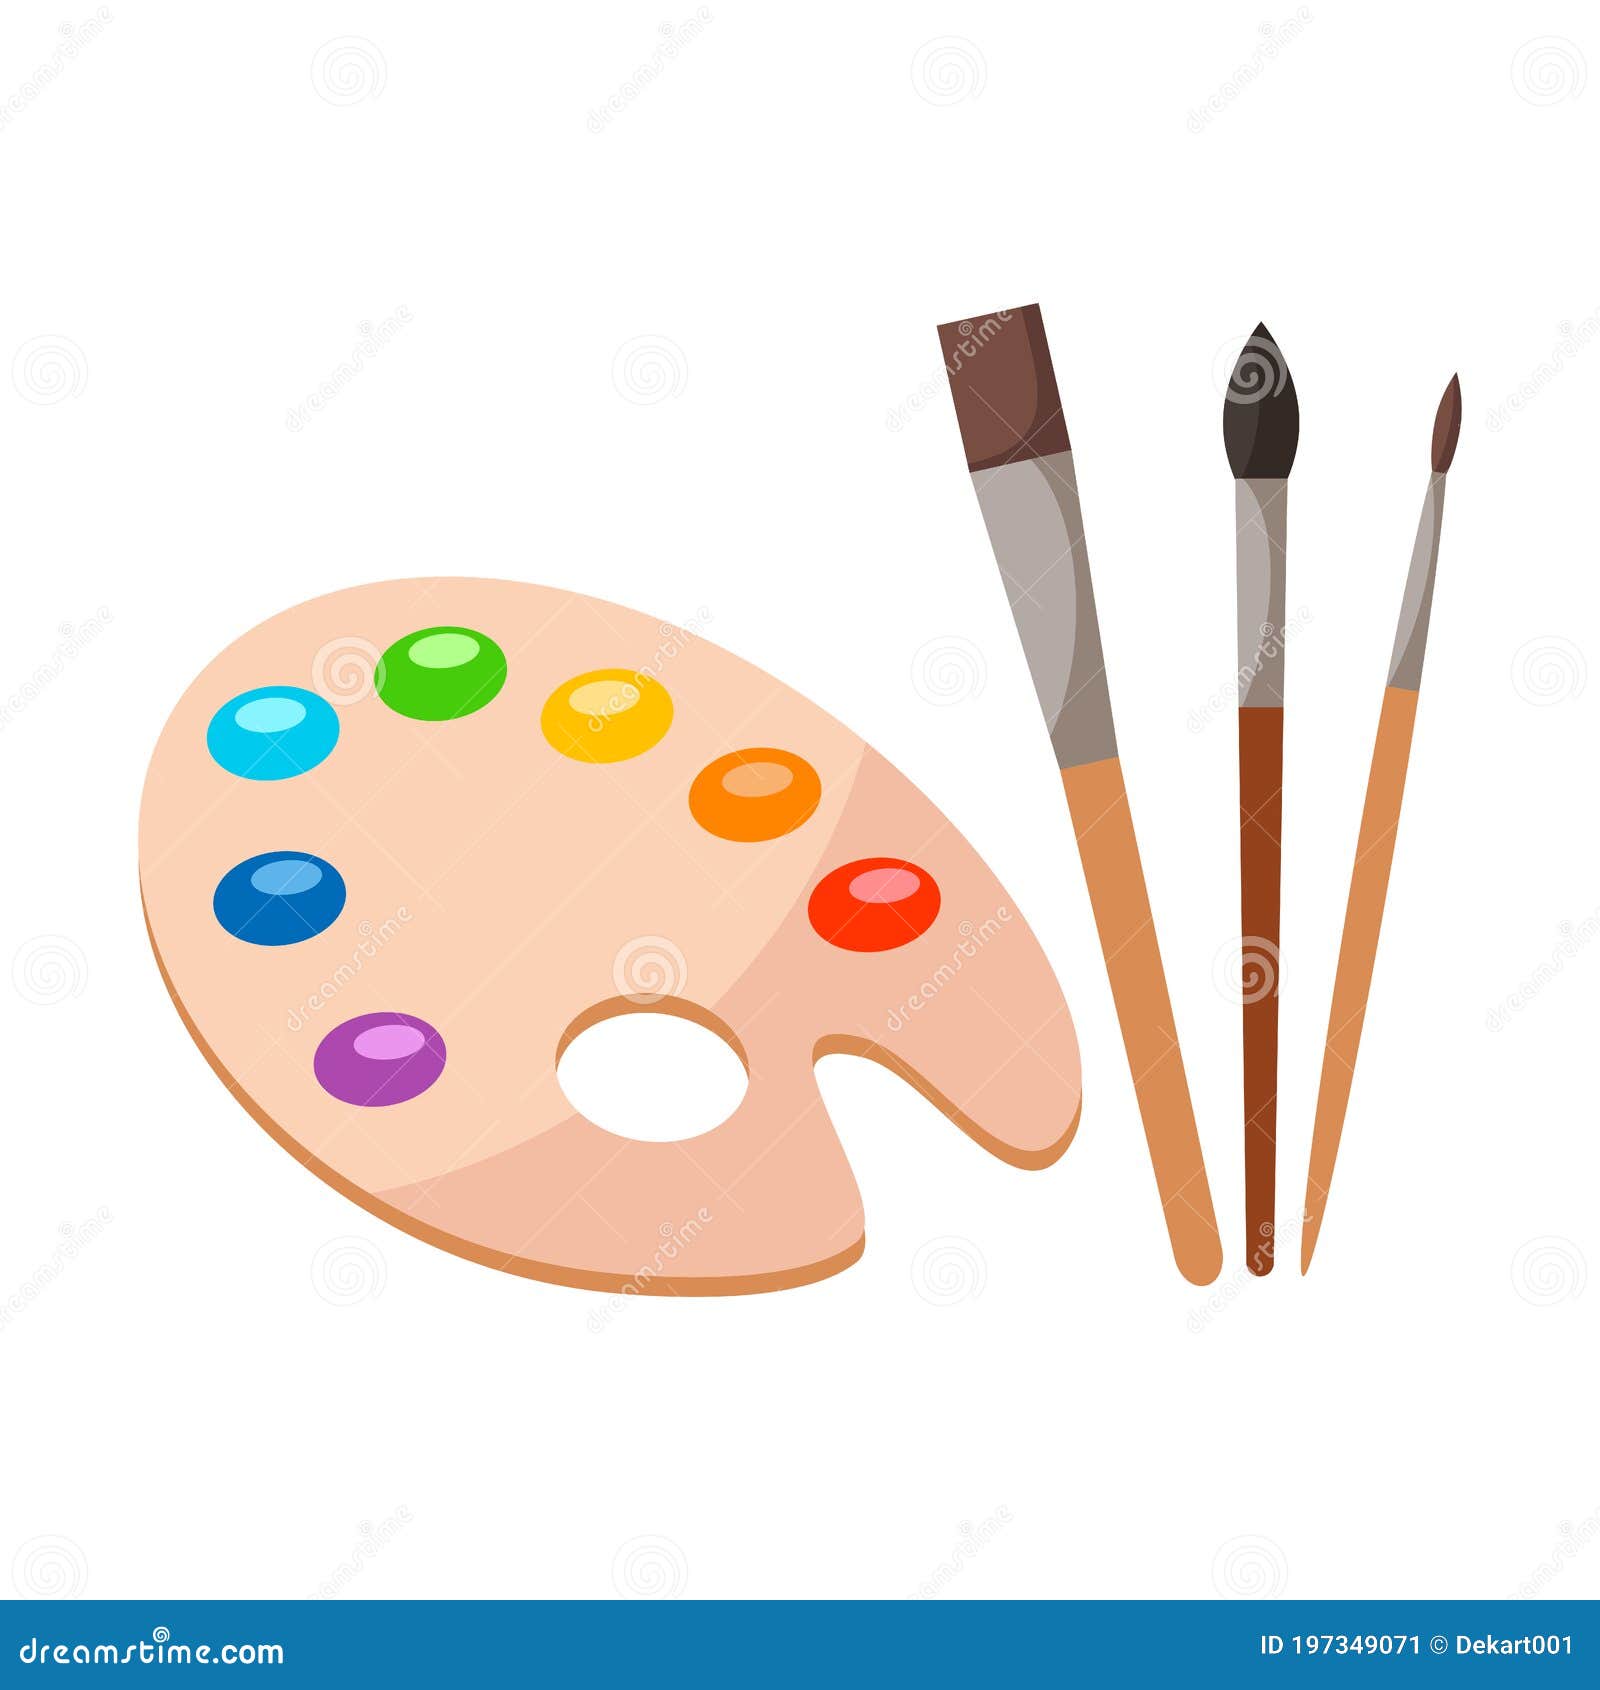 https://thumbs.dreamstime.com/z/painting-tools-elements-cartoon-colorful-vector-set-isolated-white-background-art-supplies-painting-tools-elements-cartoon-197349071.jpg